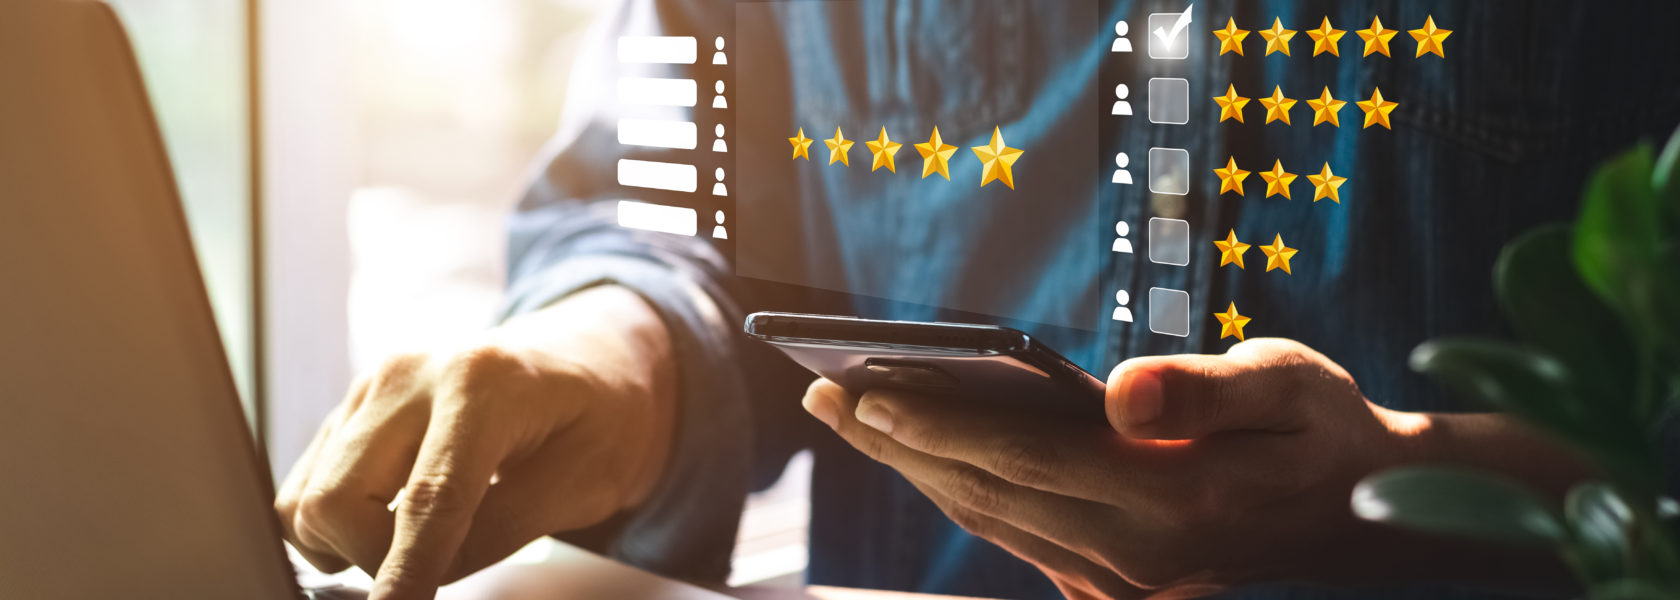 How to Manage Online Customers' Reviews